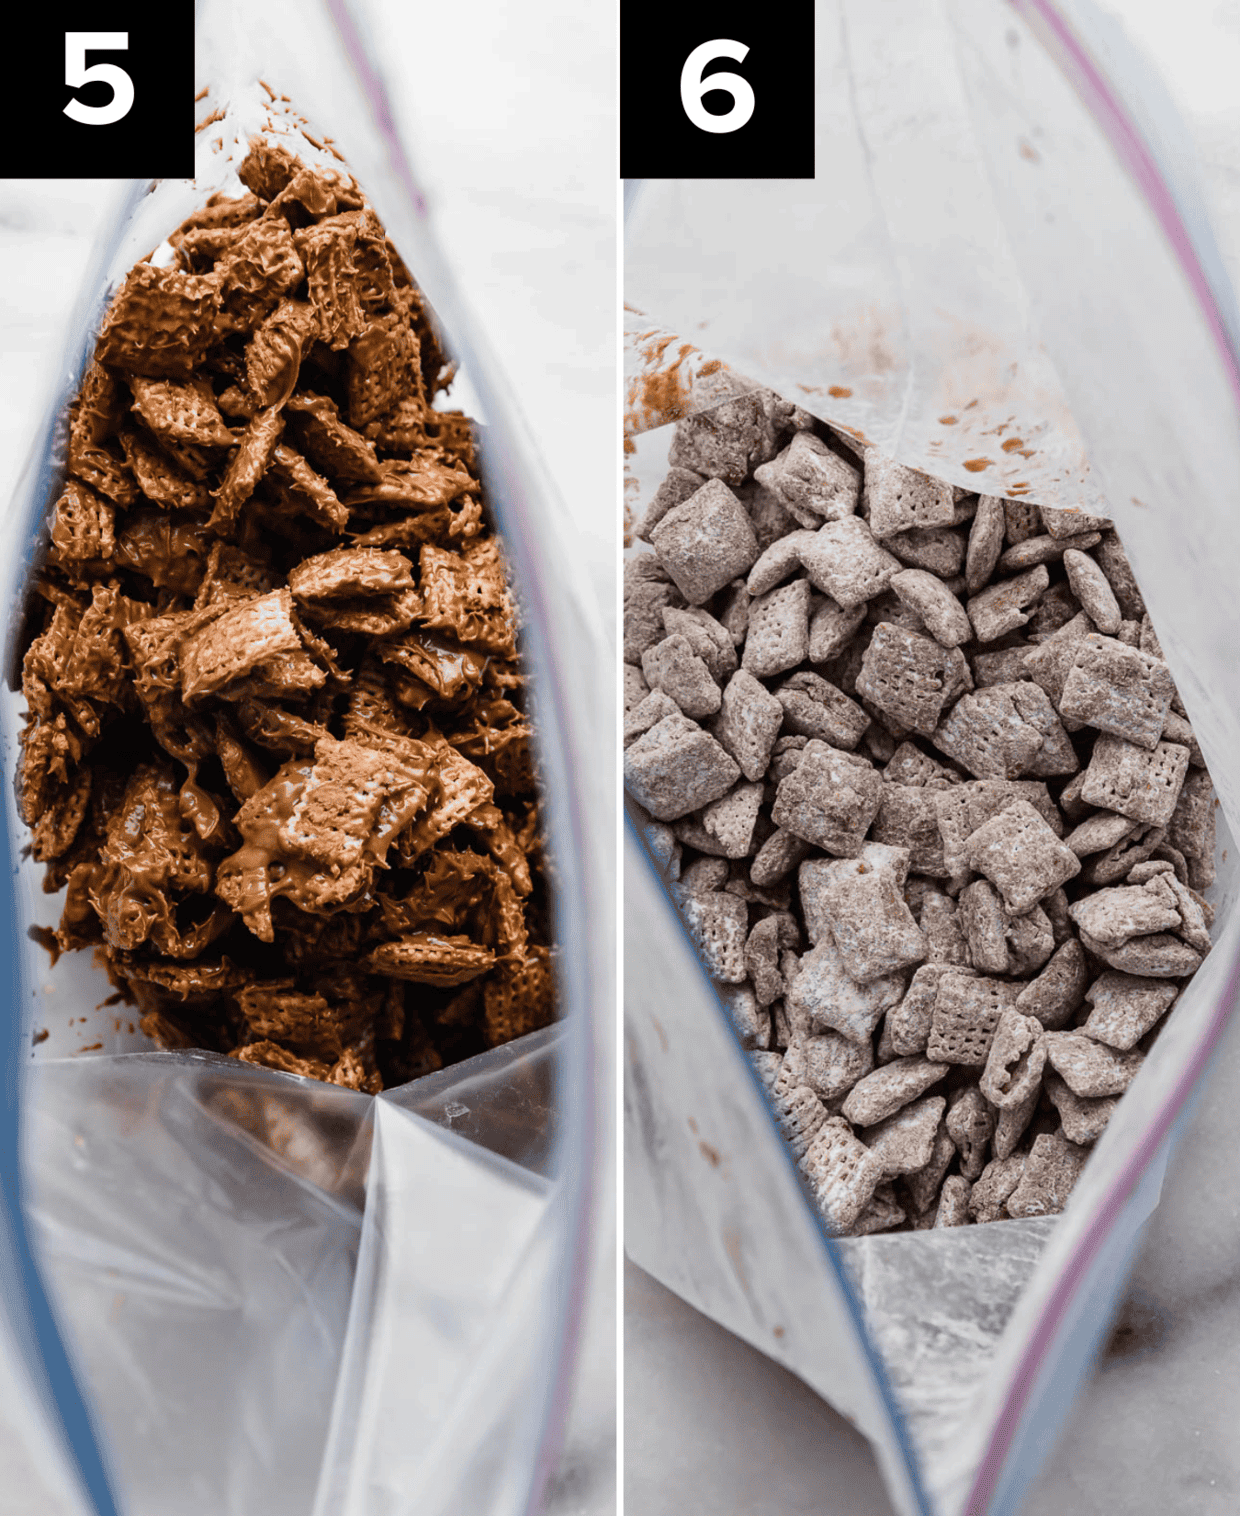 Two photos side by side, left photo is melted chocolate and butterscotch (scotcheroo flavors) covered Chex cereal in a ziplock bag, right photo is powdered sugar coated Butterscotch Puppy Chow.